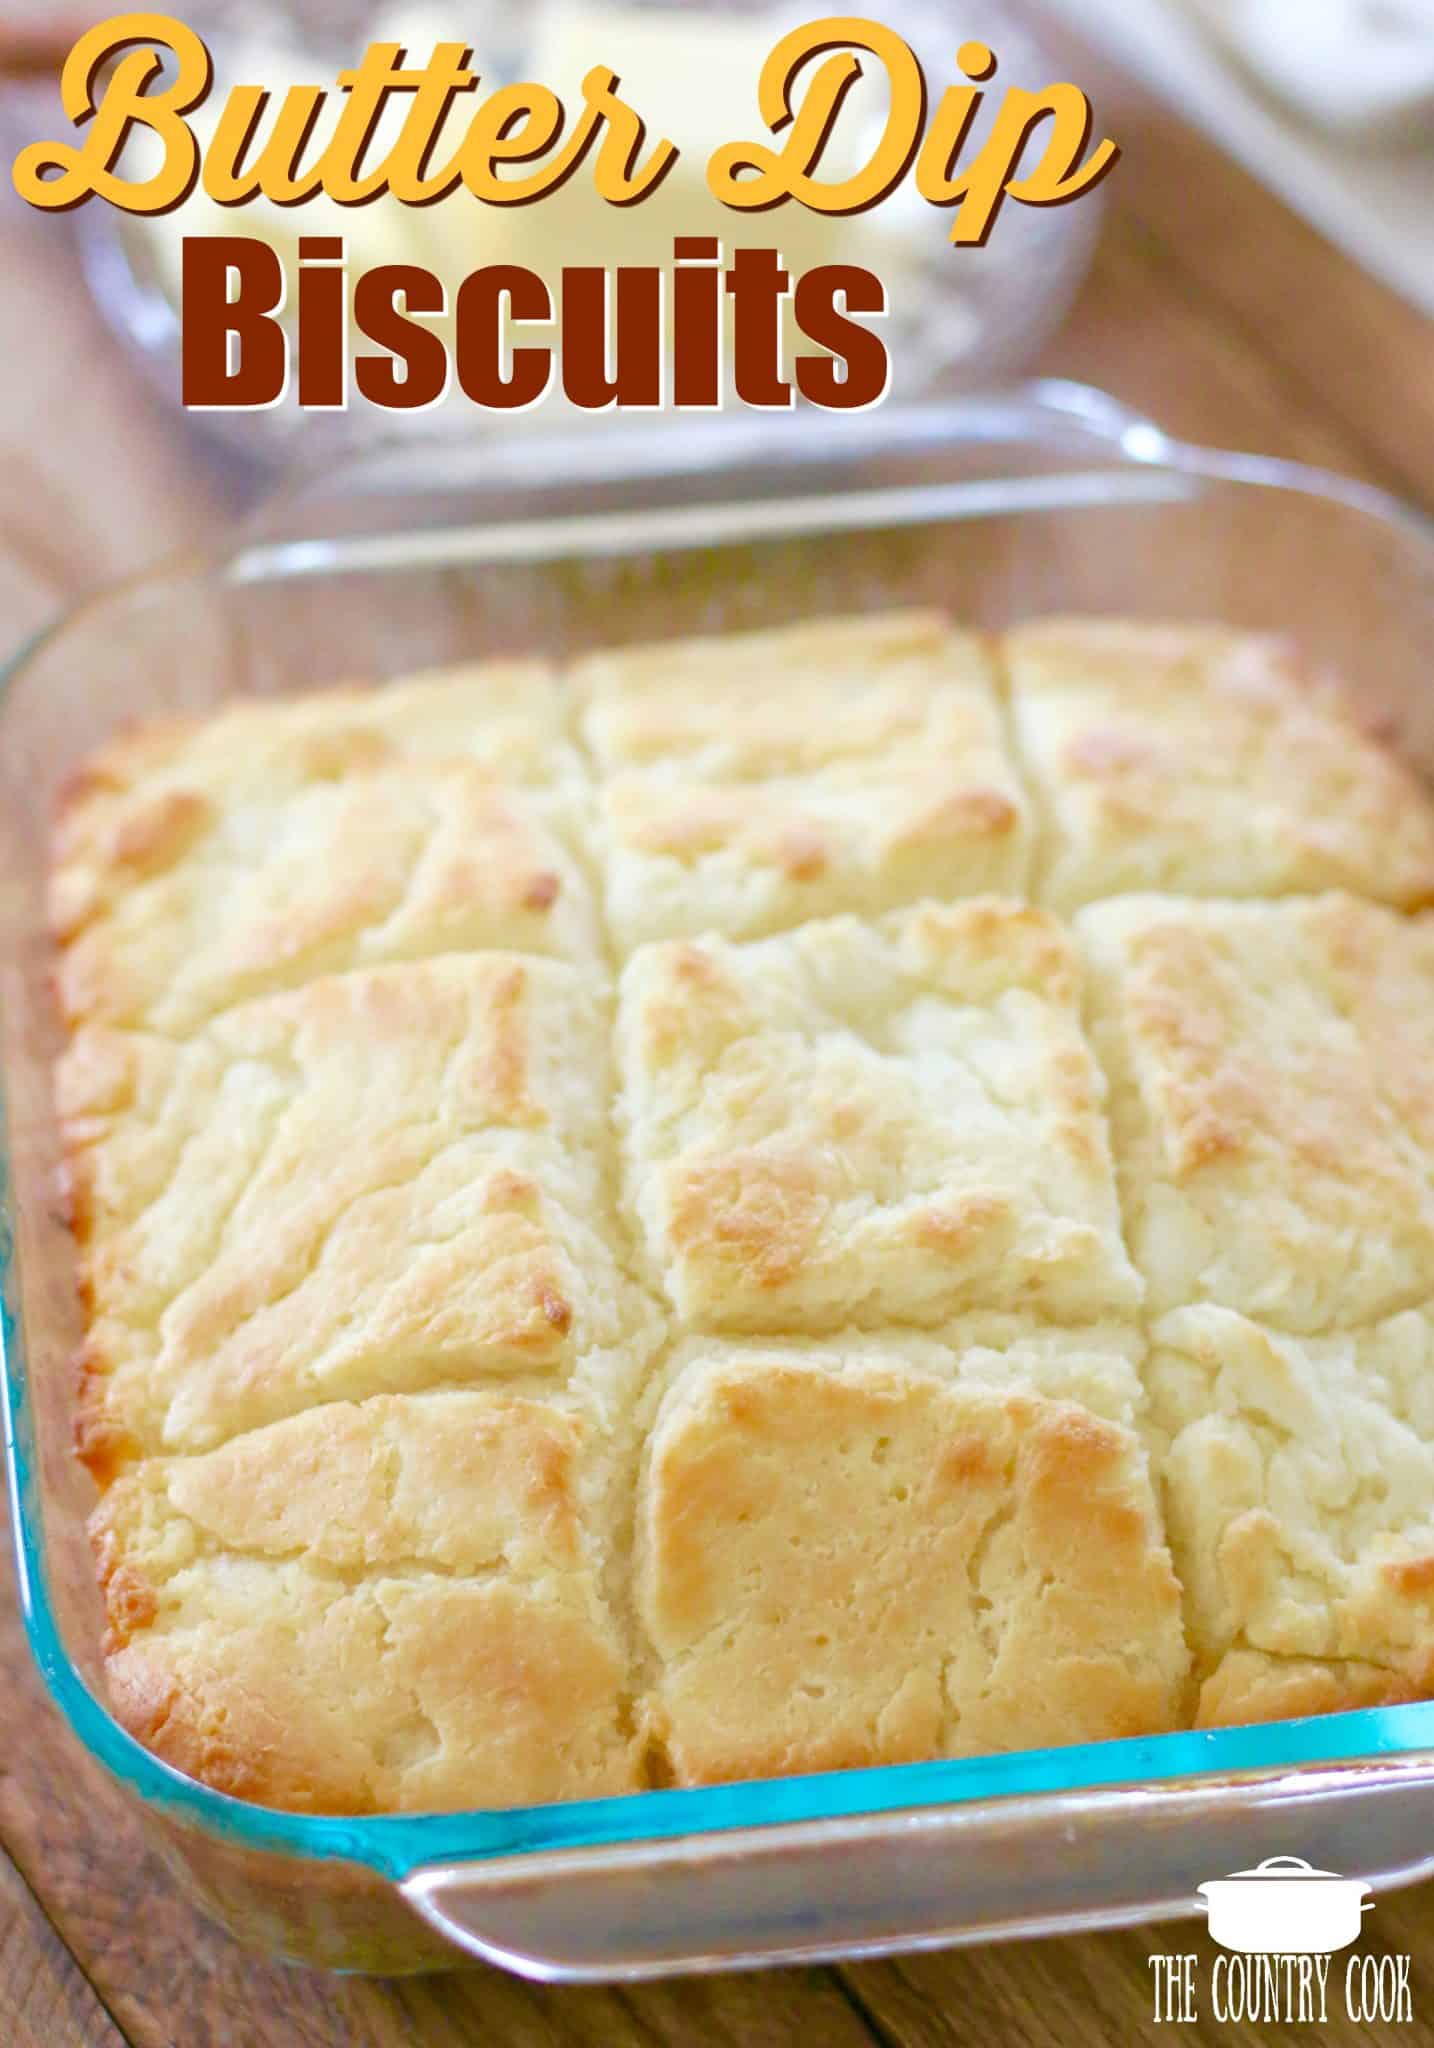 Butter Dip Buttermilk Biscuits recipe from The Country Cook. Biscuits shown in a square baking dish.